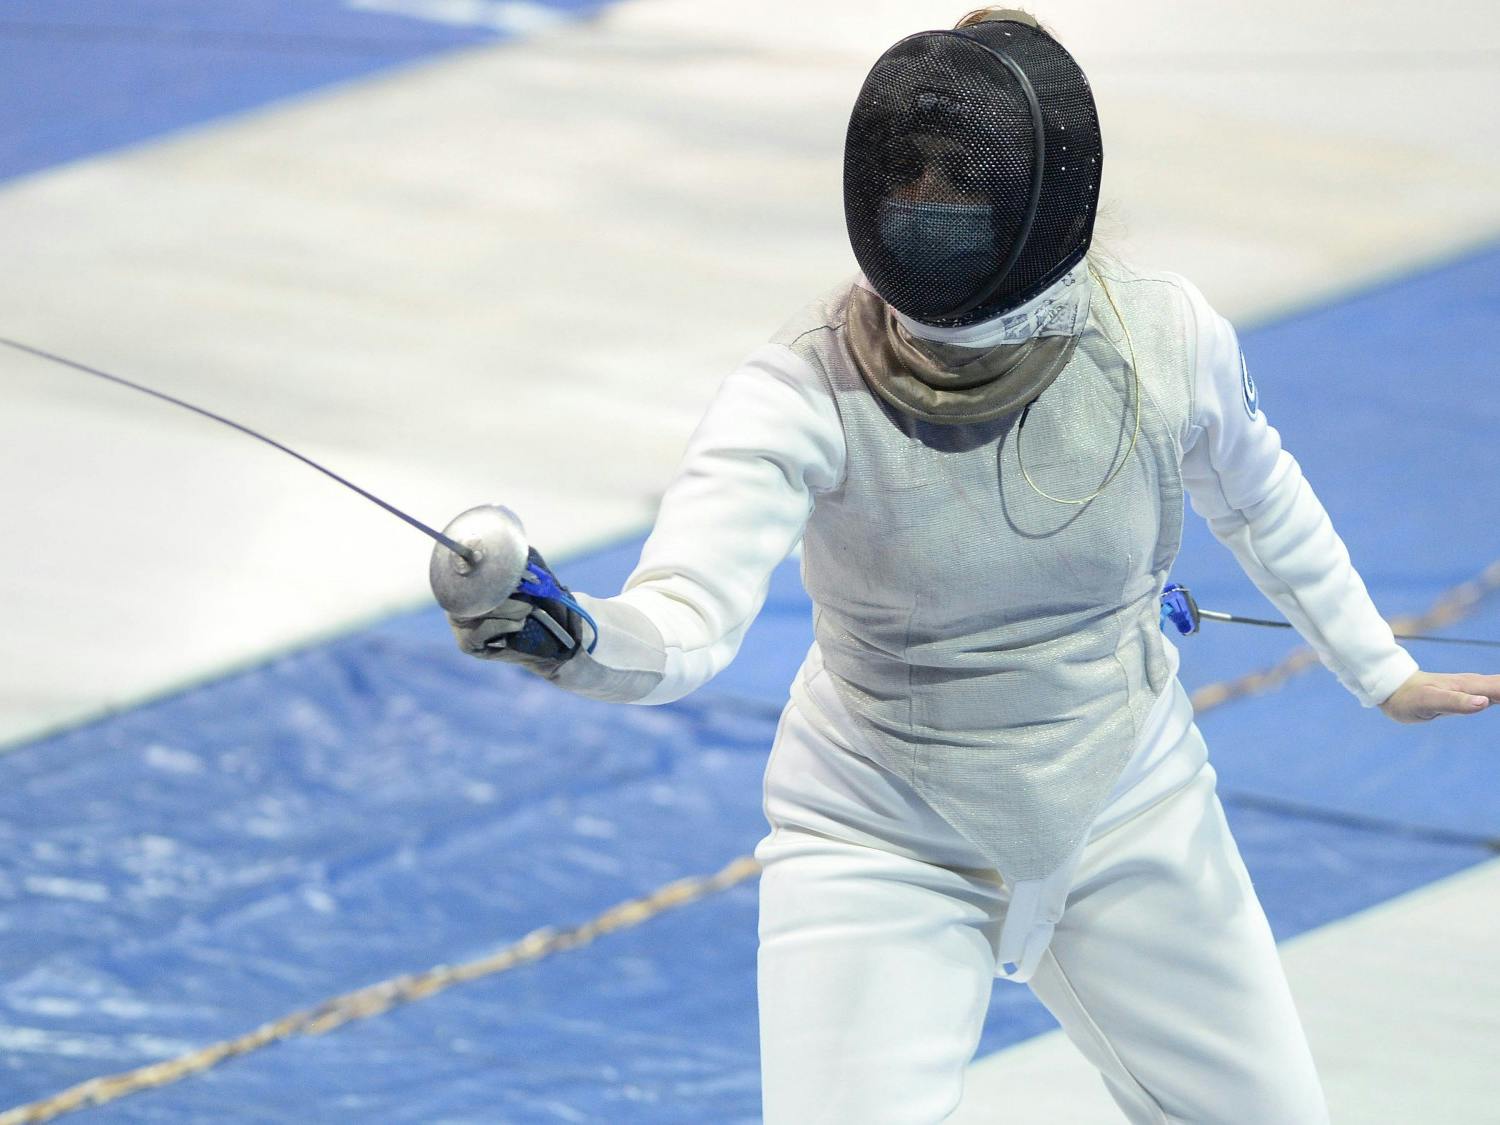 Aubrey Molloy competes in the ACC Fencing Championship in Carmichael Arena on Saturday, February 27, 2021. Photo courtesy of UNC Athletic Communications/Jeffrey A. Camarati.